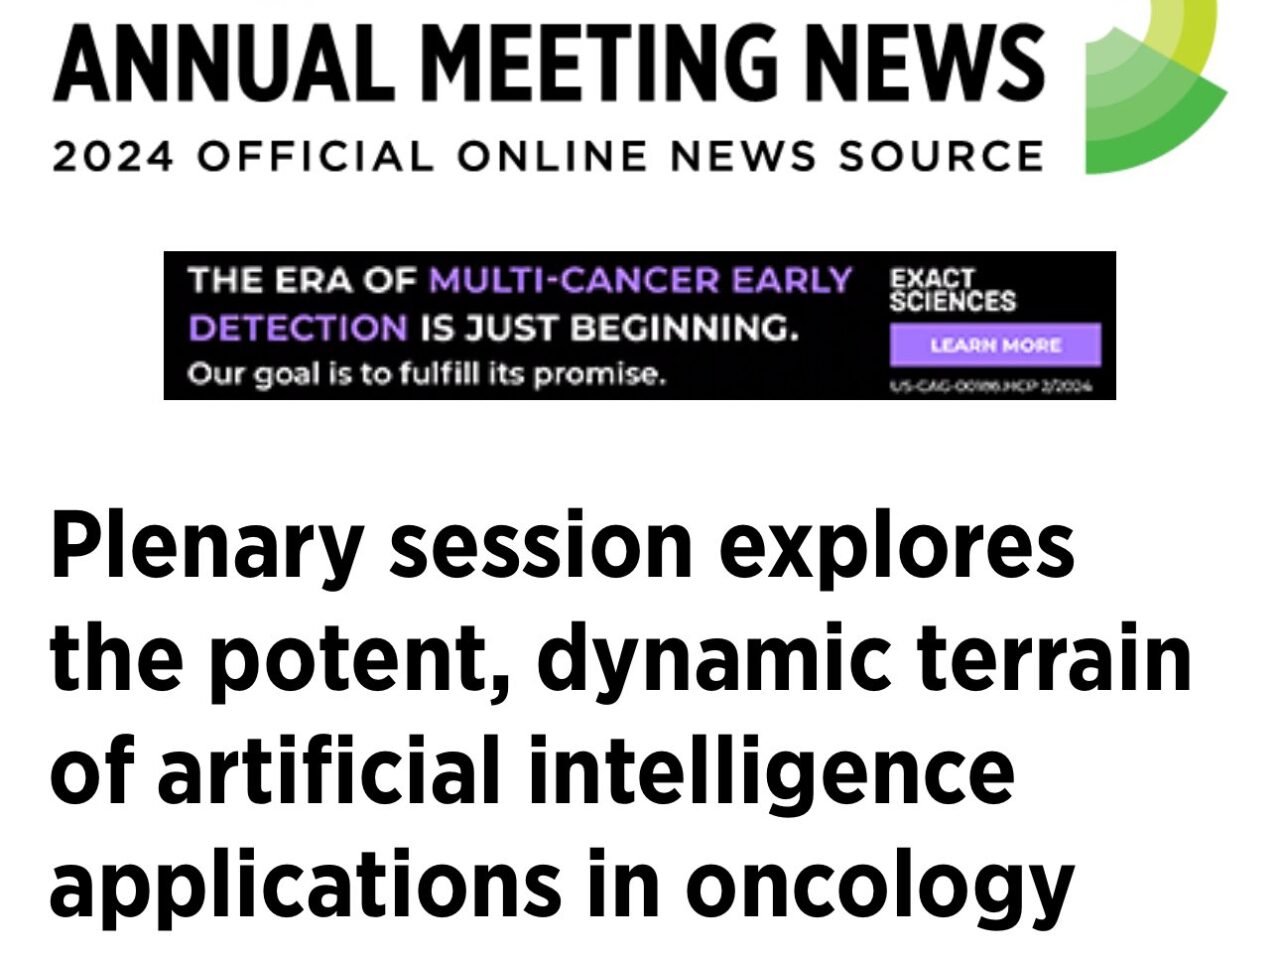 Vivek Subbiah: Read a recap of ‘AI at the Interface’ at AACR24 plenary session in AACR Annual Meeting News